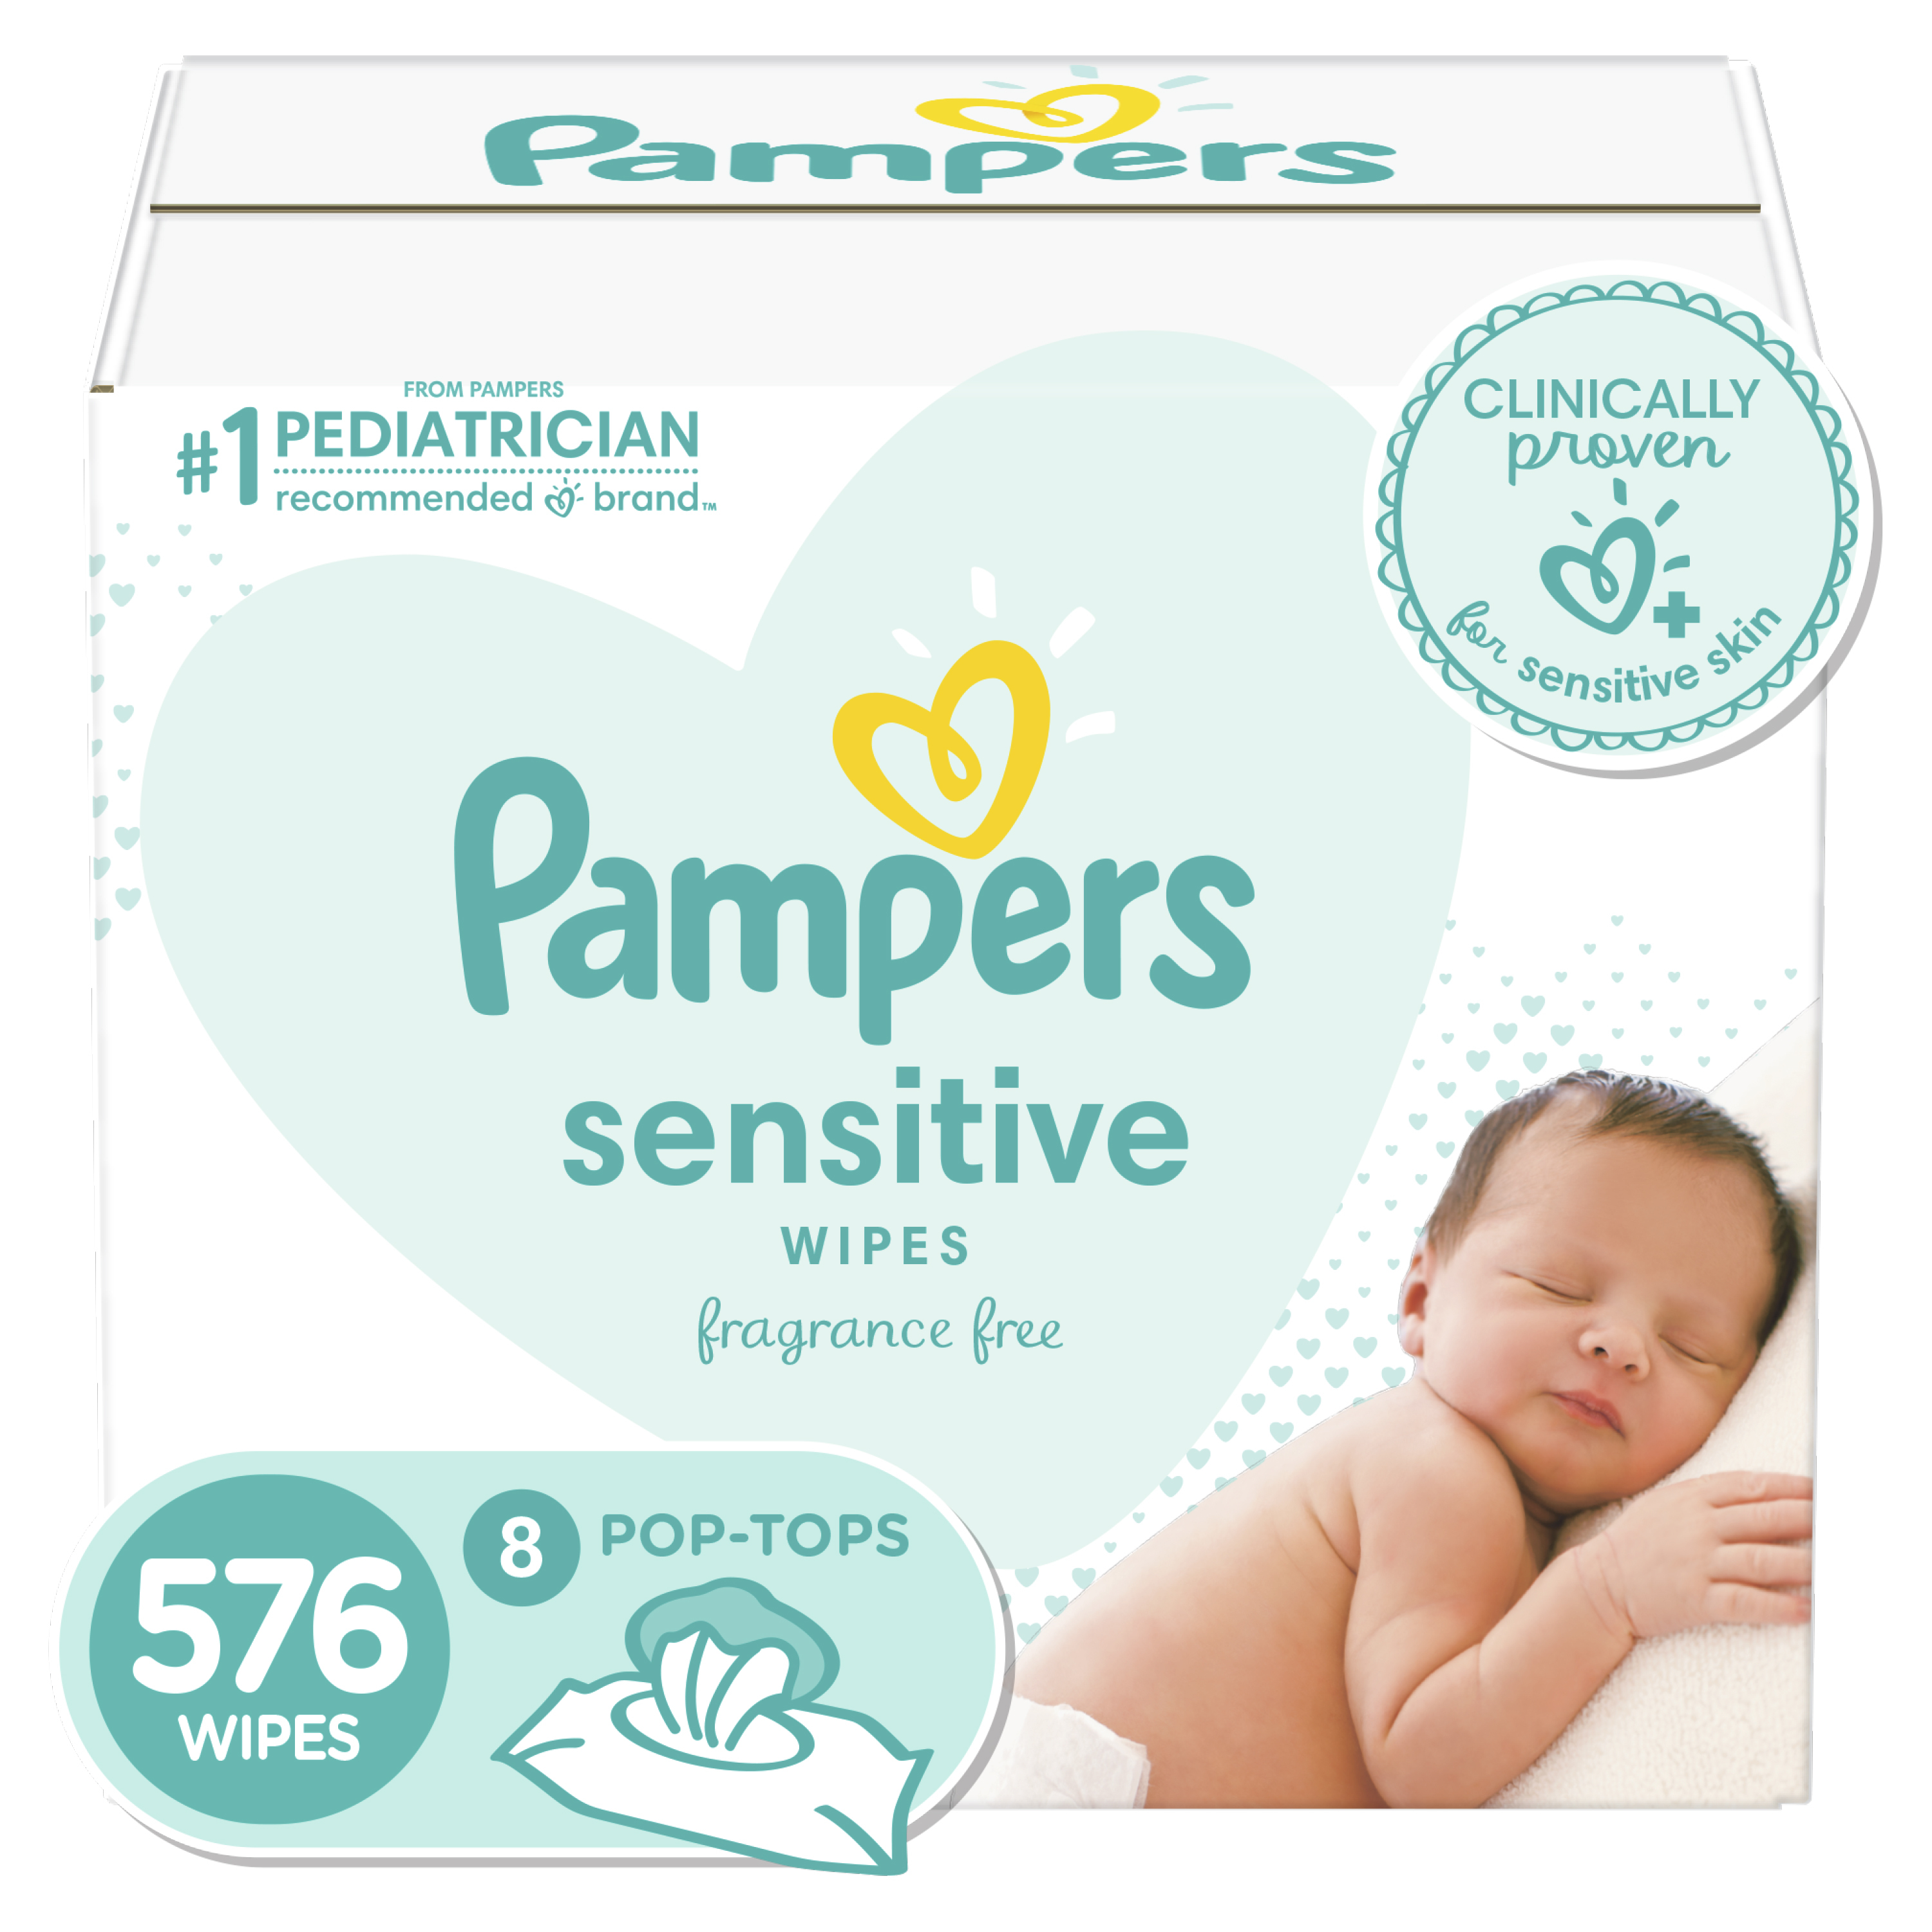 Pampers Baby Wipes Sensitive Perfume Free 8X Refill Packs (Tub Not Included) 576 Count - image 3 of 14